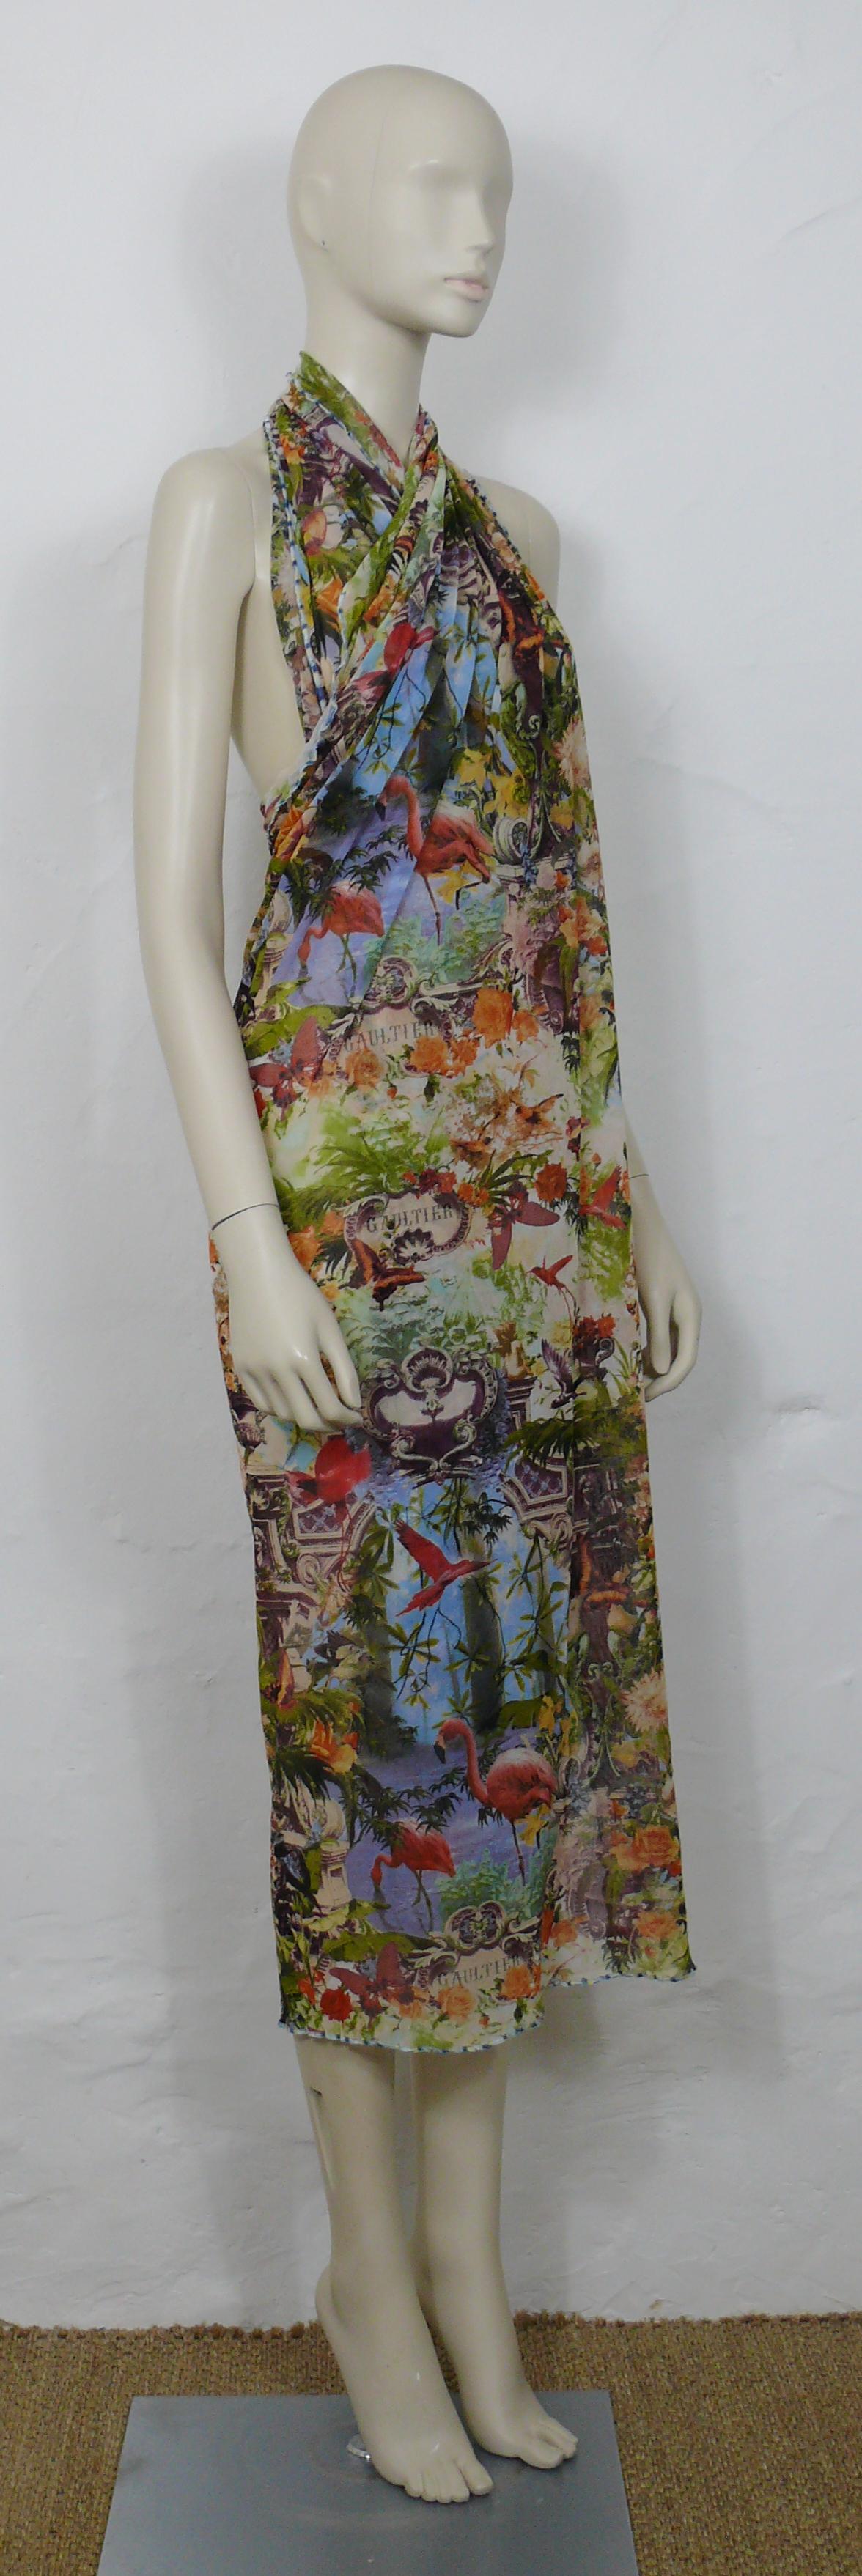 JEAN PAUL GAULTIER vintage sheer mesh pareo featuring an opulent and multicolored tropical print with flamingos, butterflies, birds, architectural elements and GAULTIER logos.

Missing brand label (see picture #7).

Missing size tag.
Please refer to